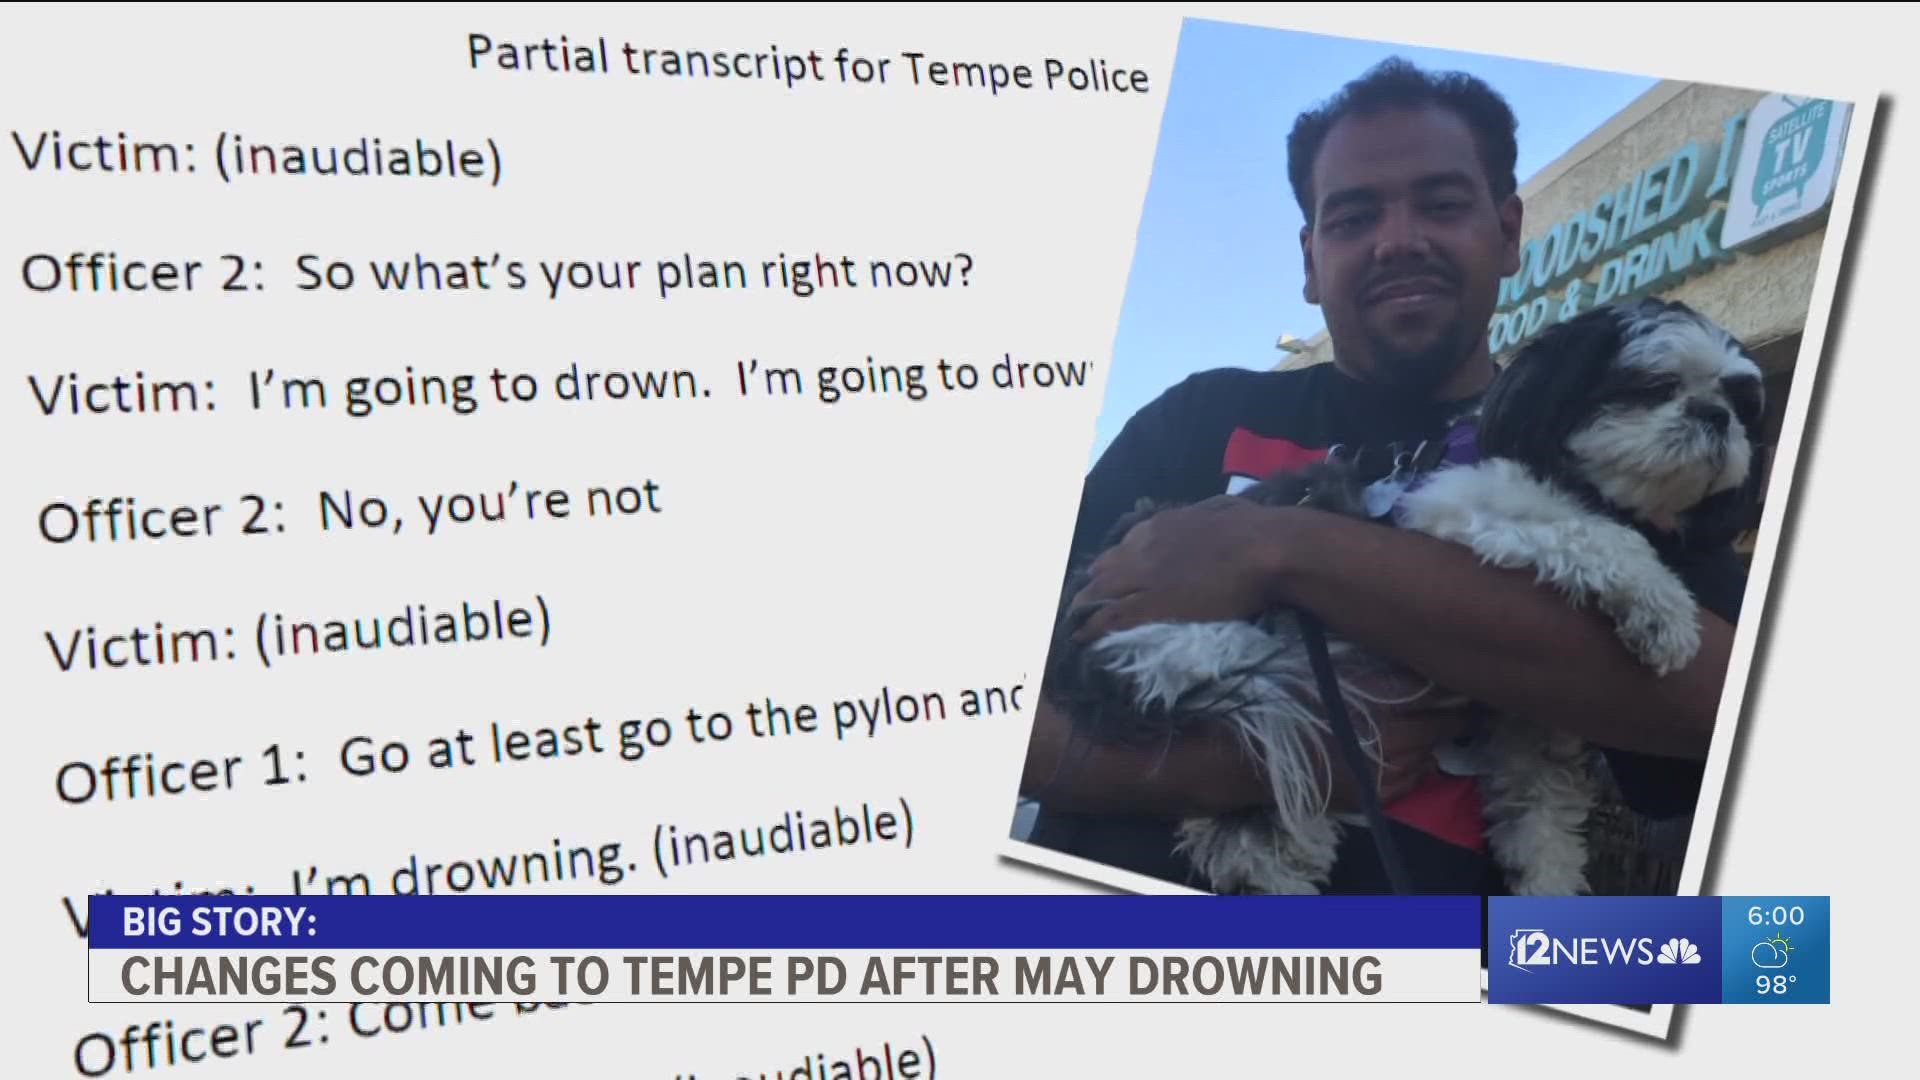 City officials announced that all Tempe police officers will now carry water rescue throw bags. They have already received training on how to use them.